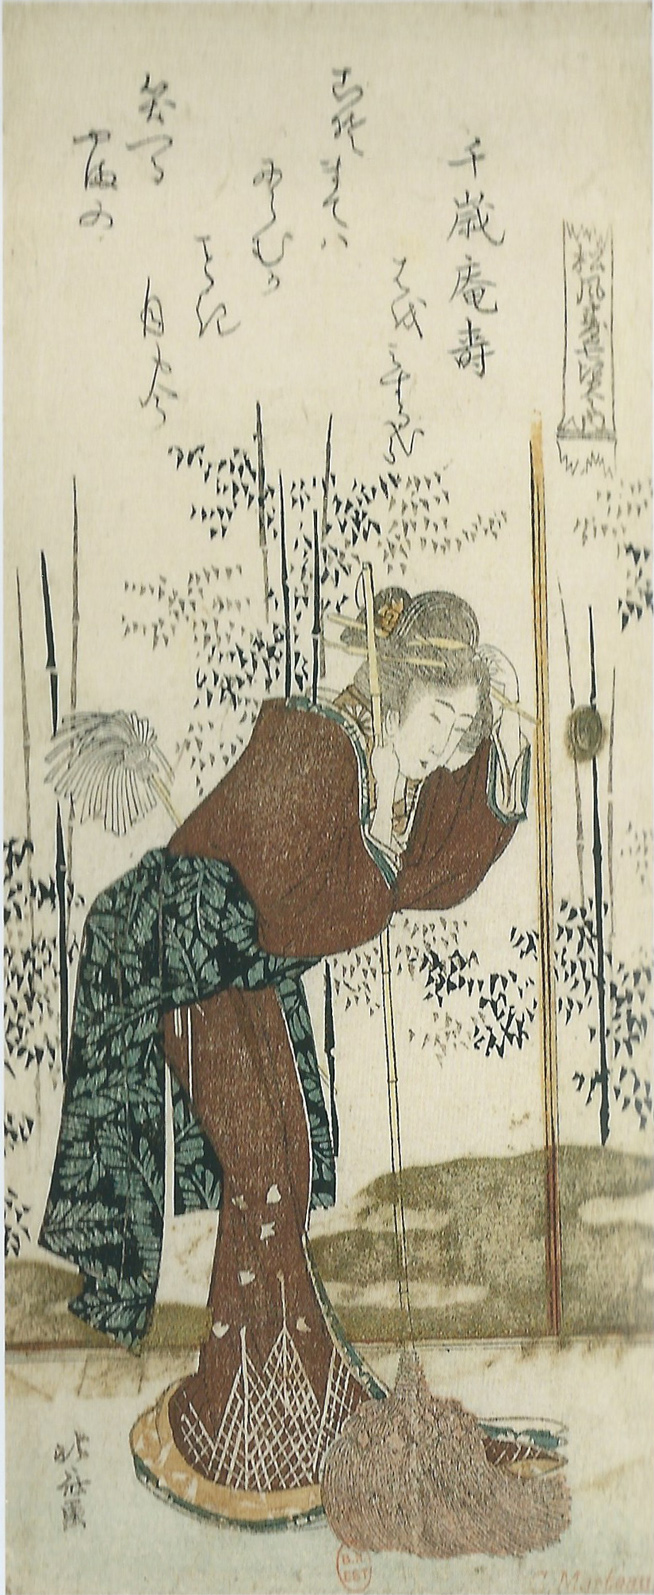 Hokusai - A Beauty Leaning on a Broom - 7 Sages for the Shofudai